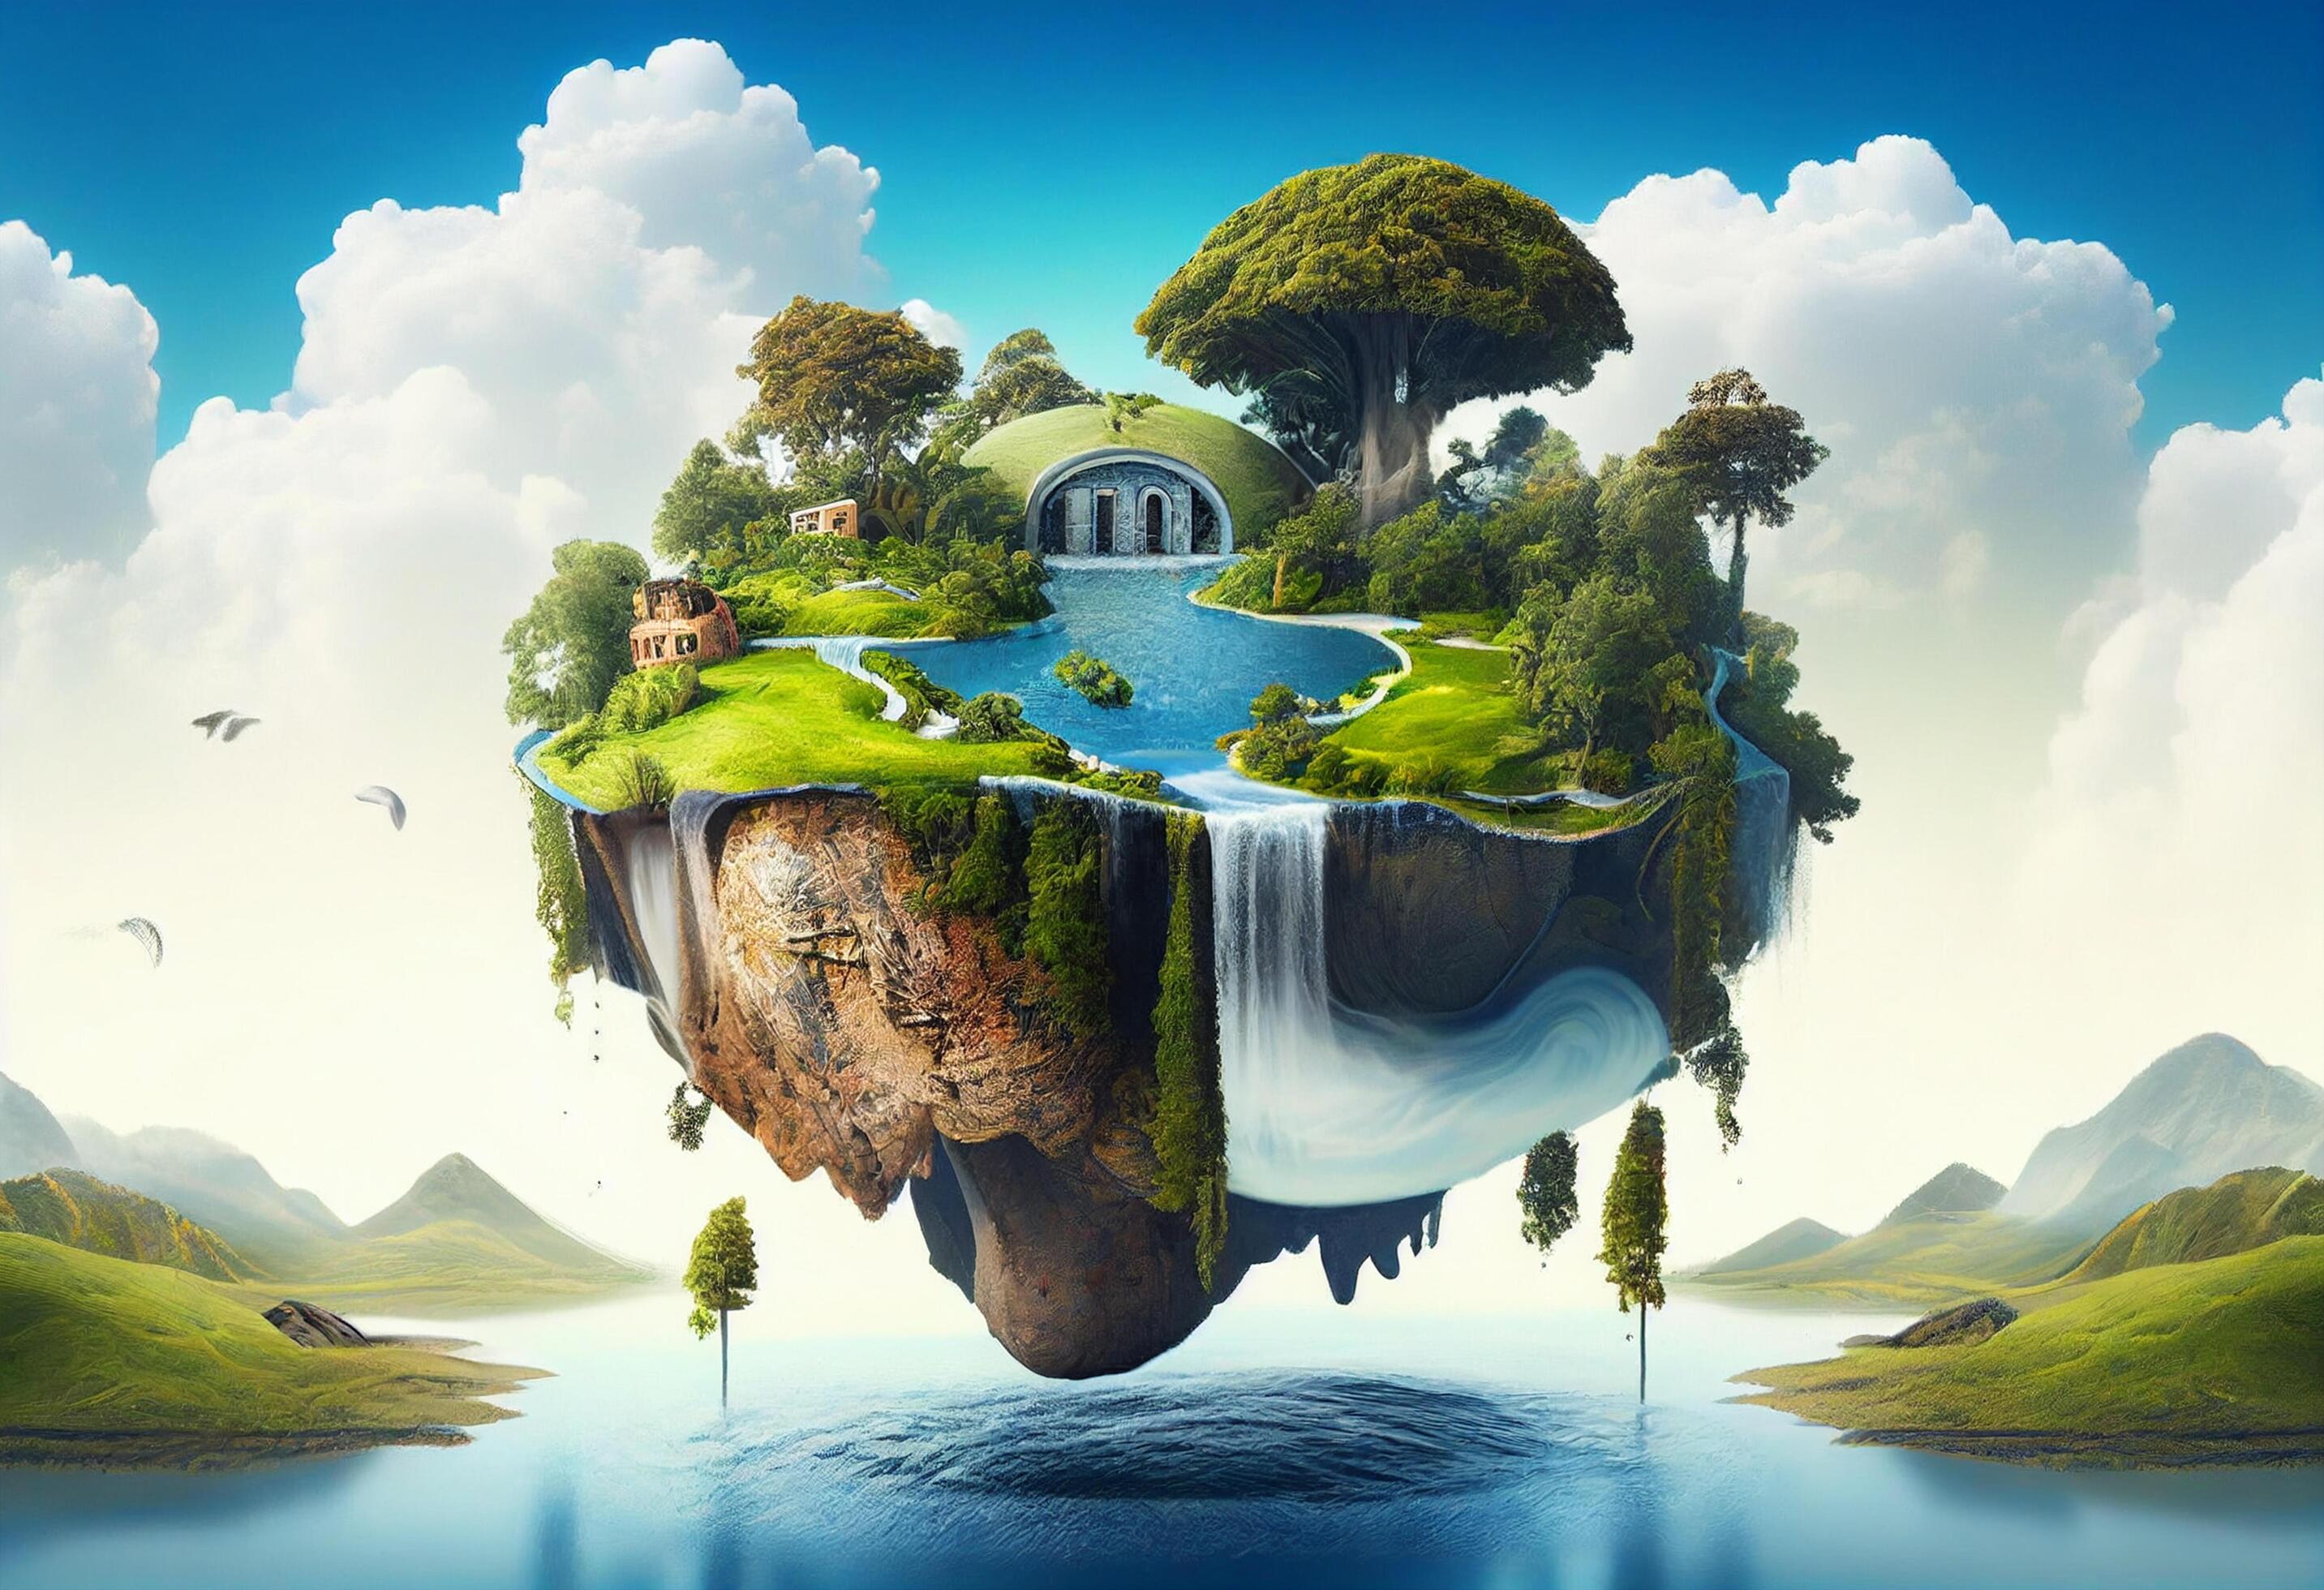 https://static.vecteezy.com/system/resources/previews/022/653/673/large_2x/fantasy-island-with-waterfalls-3d-illustration-elements-of-this-image-furnished-by-nasa-generative-ai-free-photo.jpg